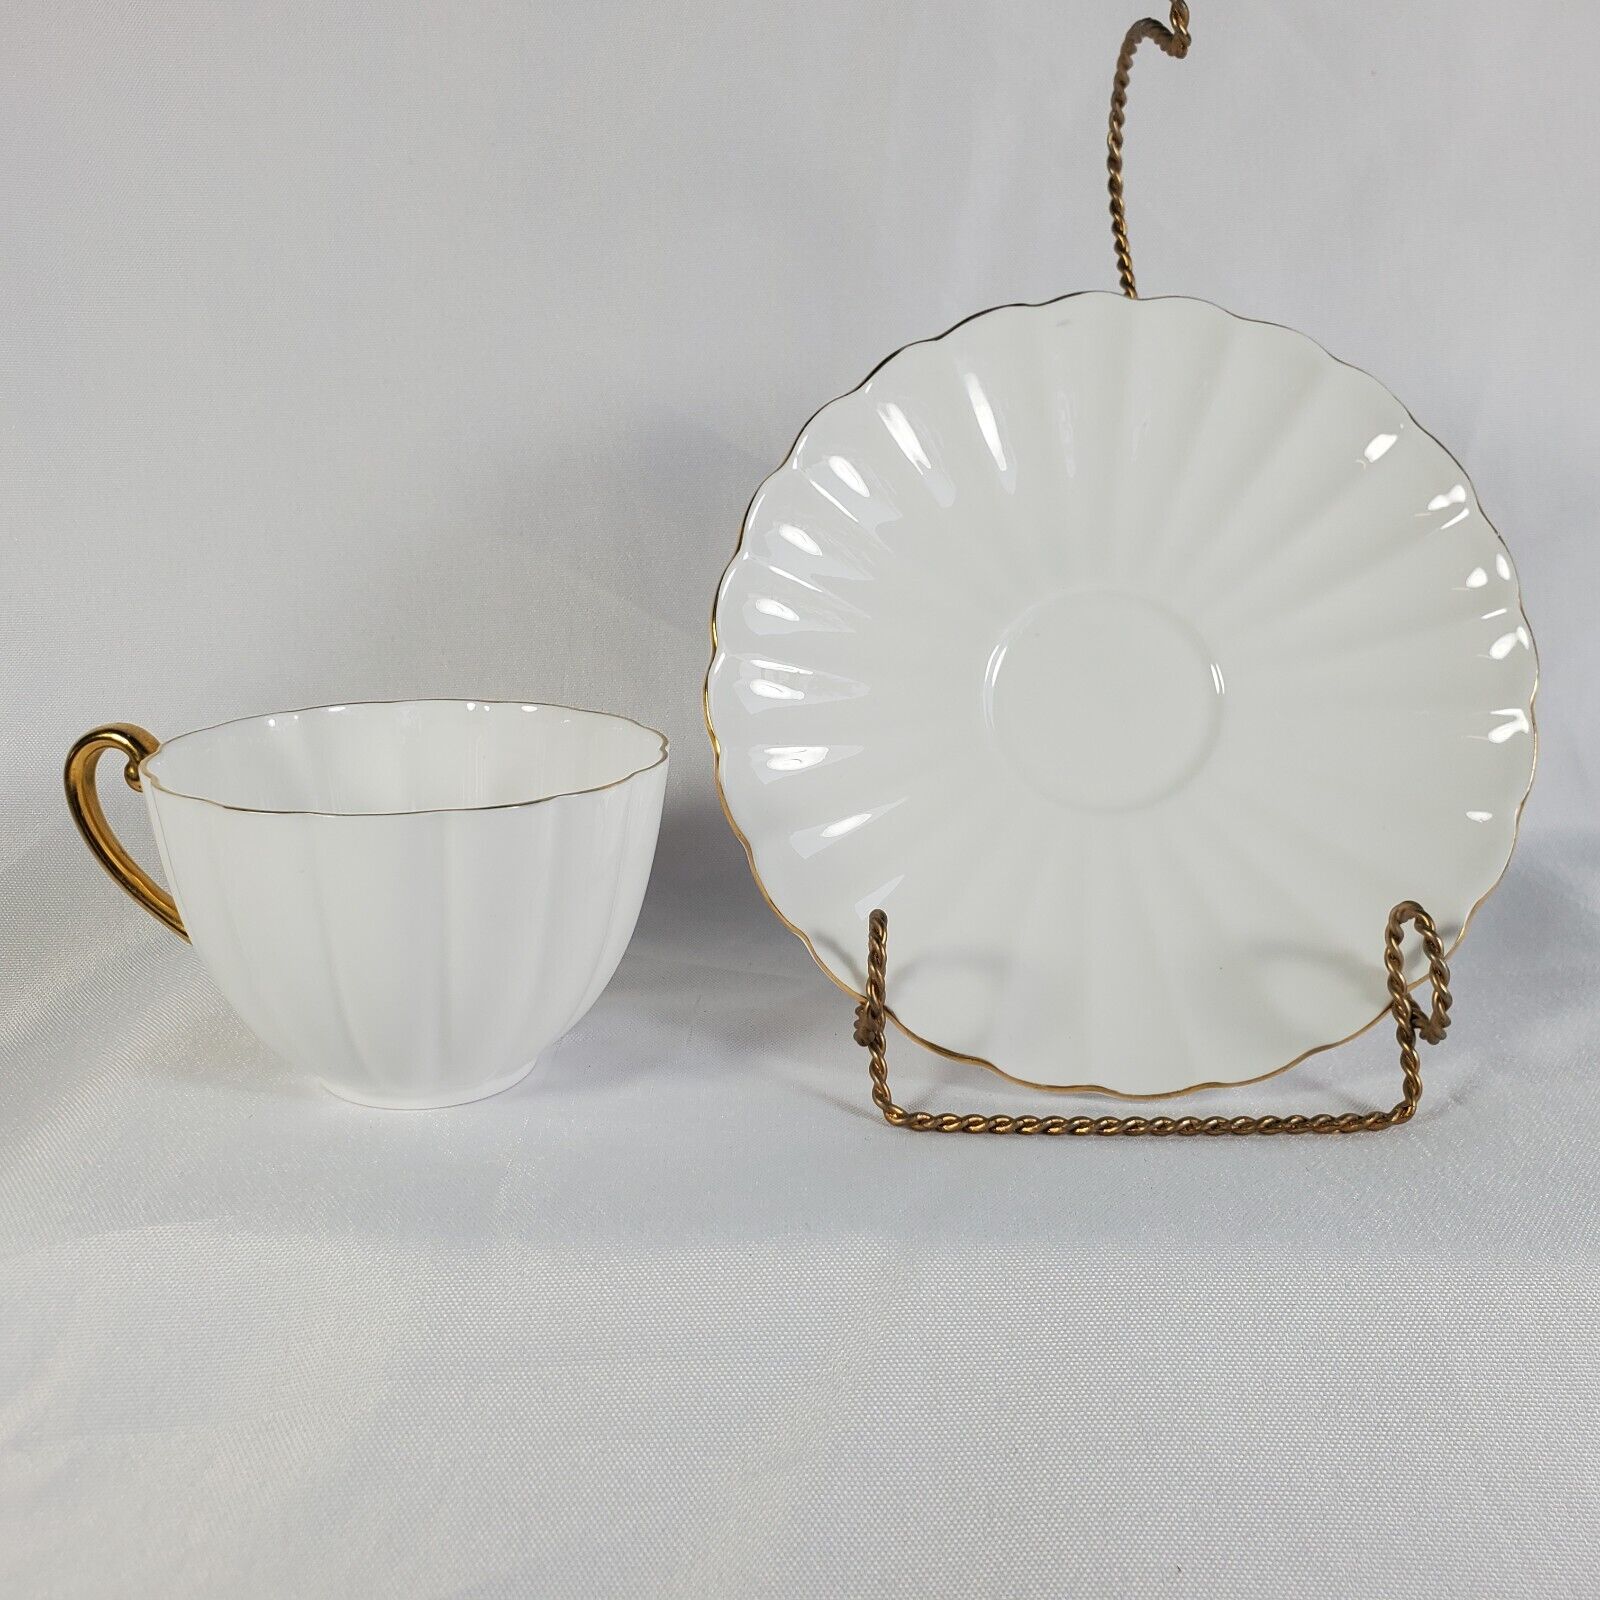 Shelley Scalloped Teacup and Saucer set White with Gold trim Fine Bone China